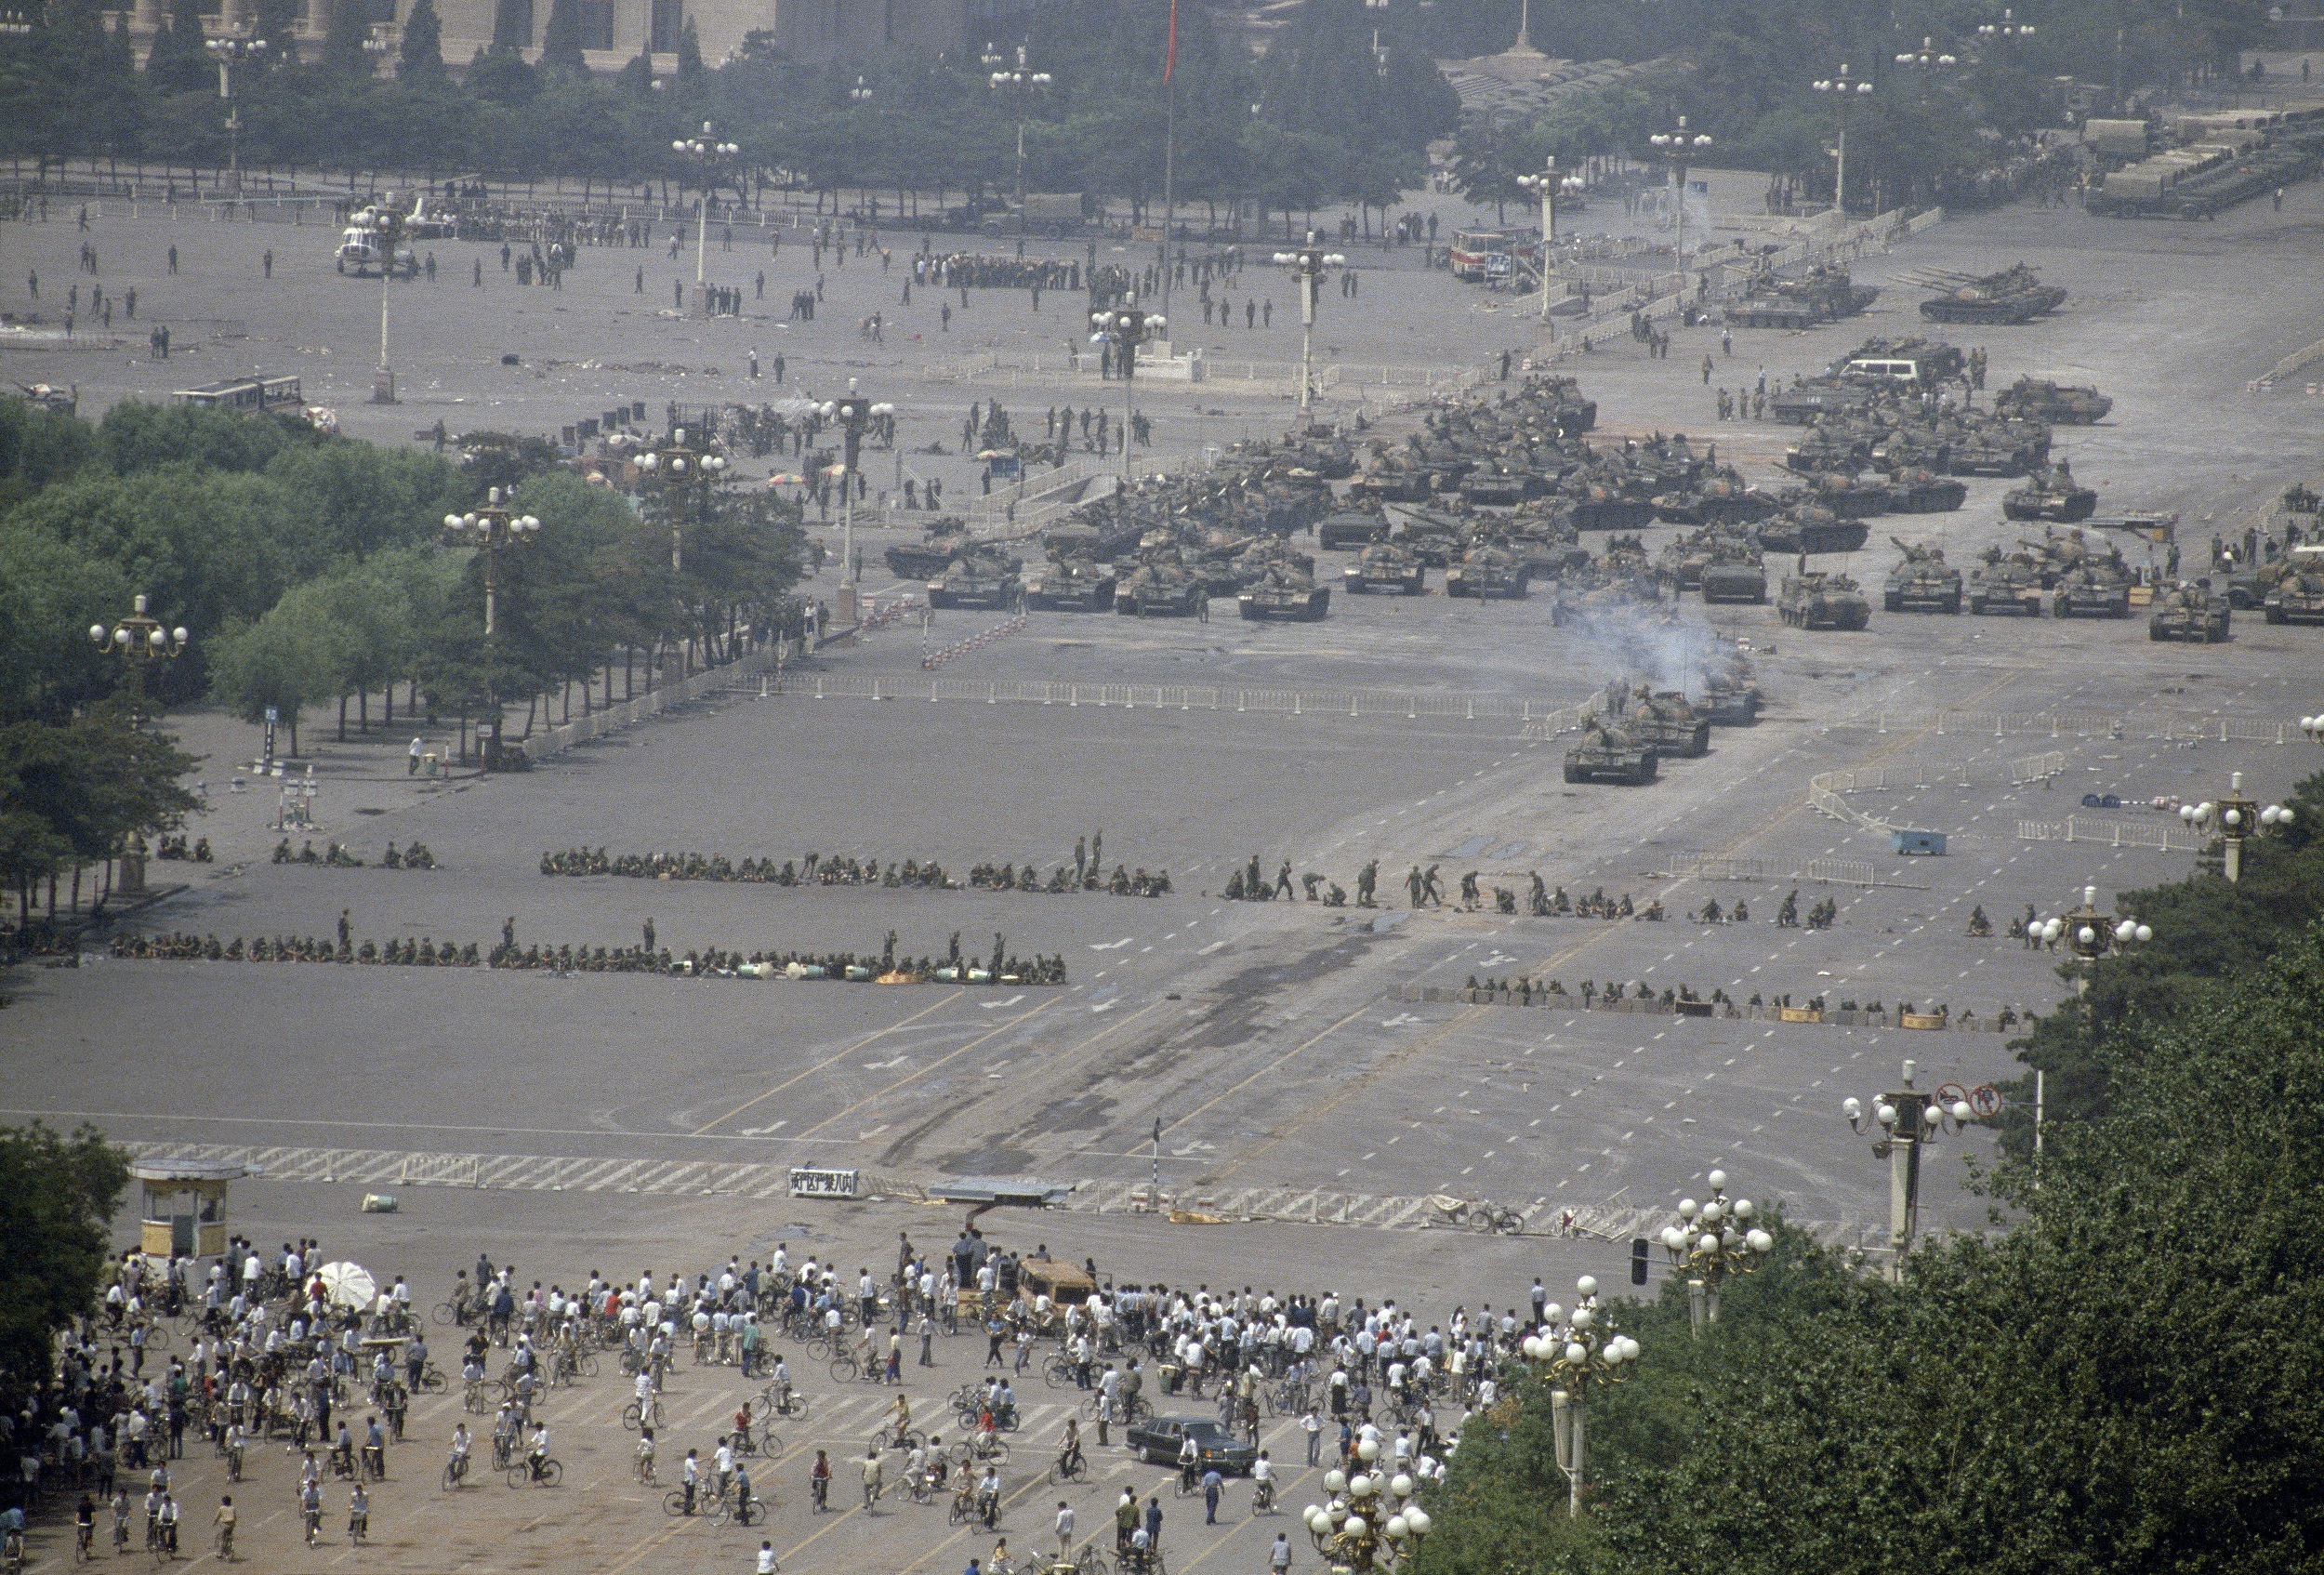 CHINA. Beijing. Tiananmen Square protests. 1989.